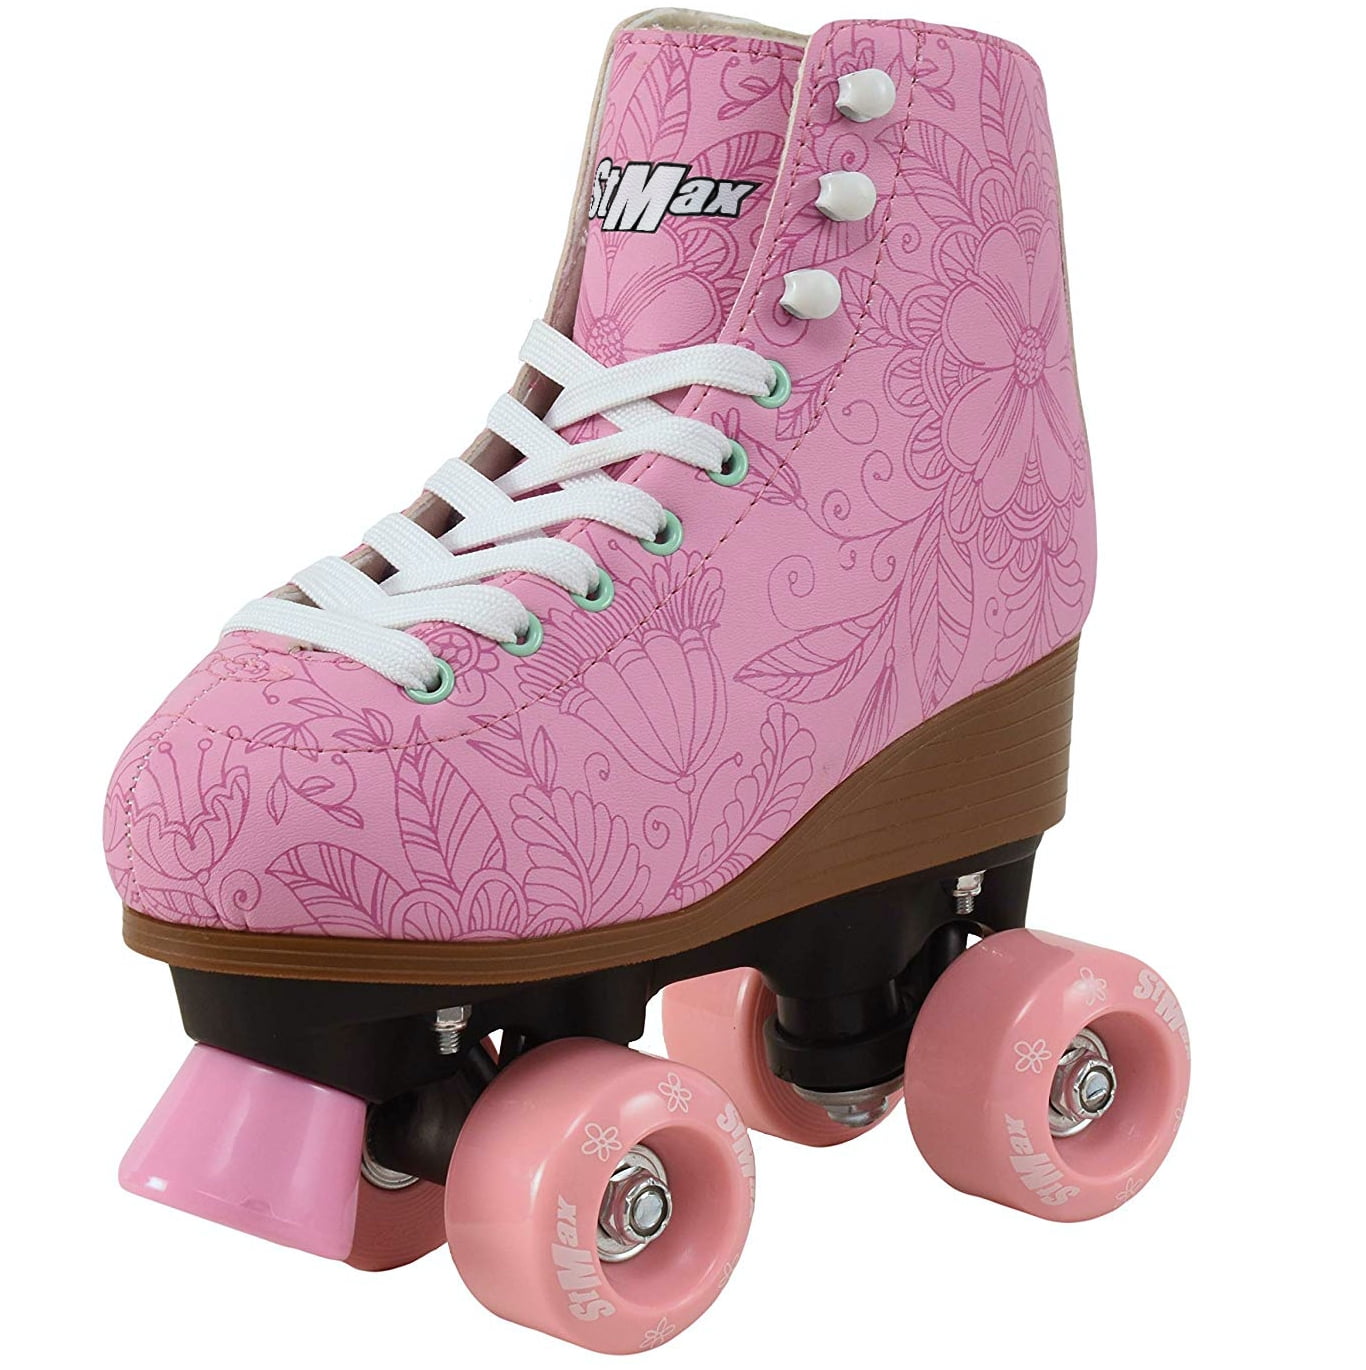 Quad Roller Skates for Girls and Women Size 8 Adult Pink Flower Outdoor Derby 